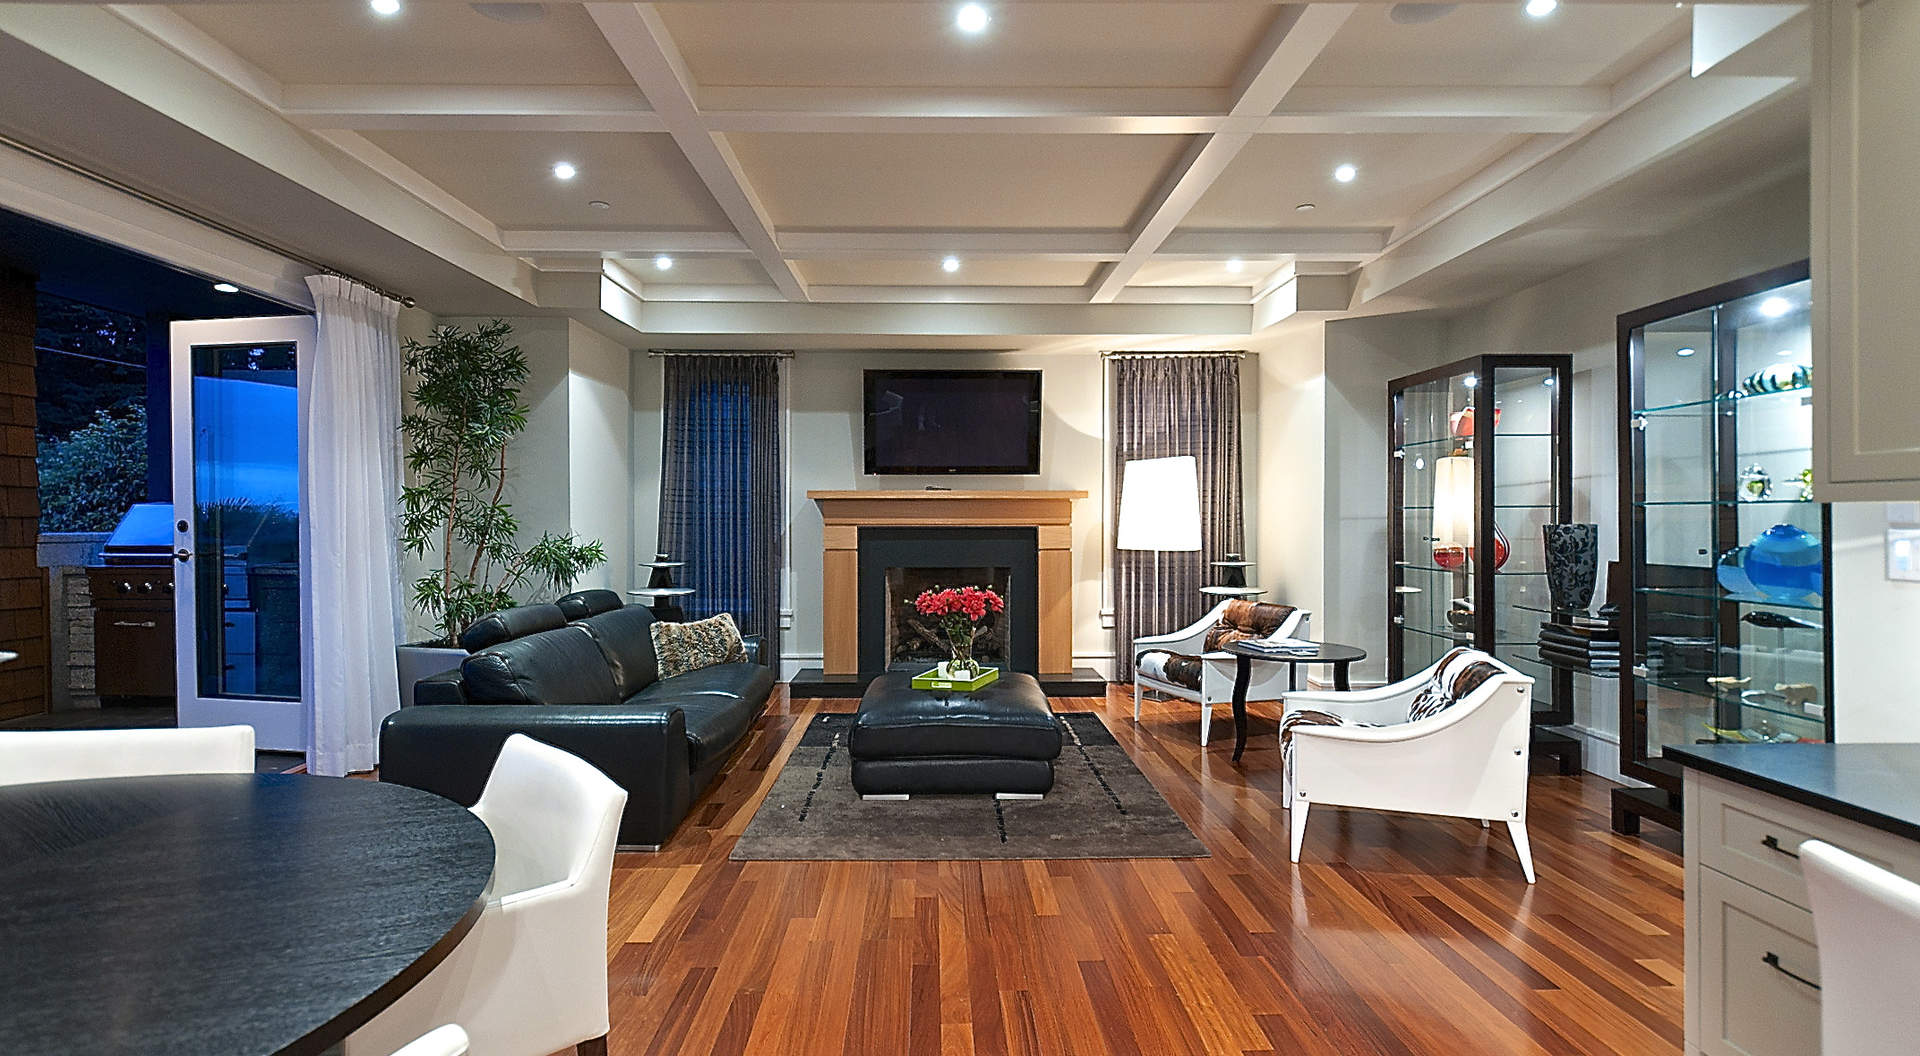 An Adjoining Family Room with "Eclipse" Doors